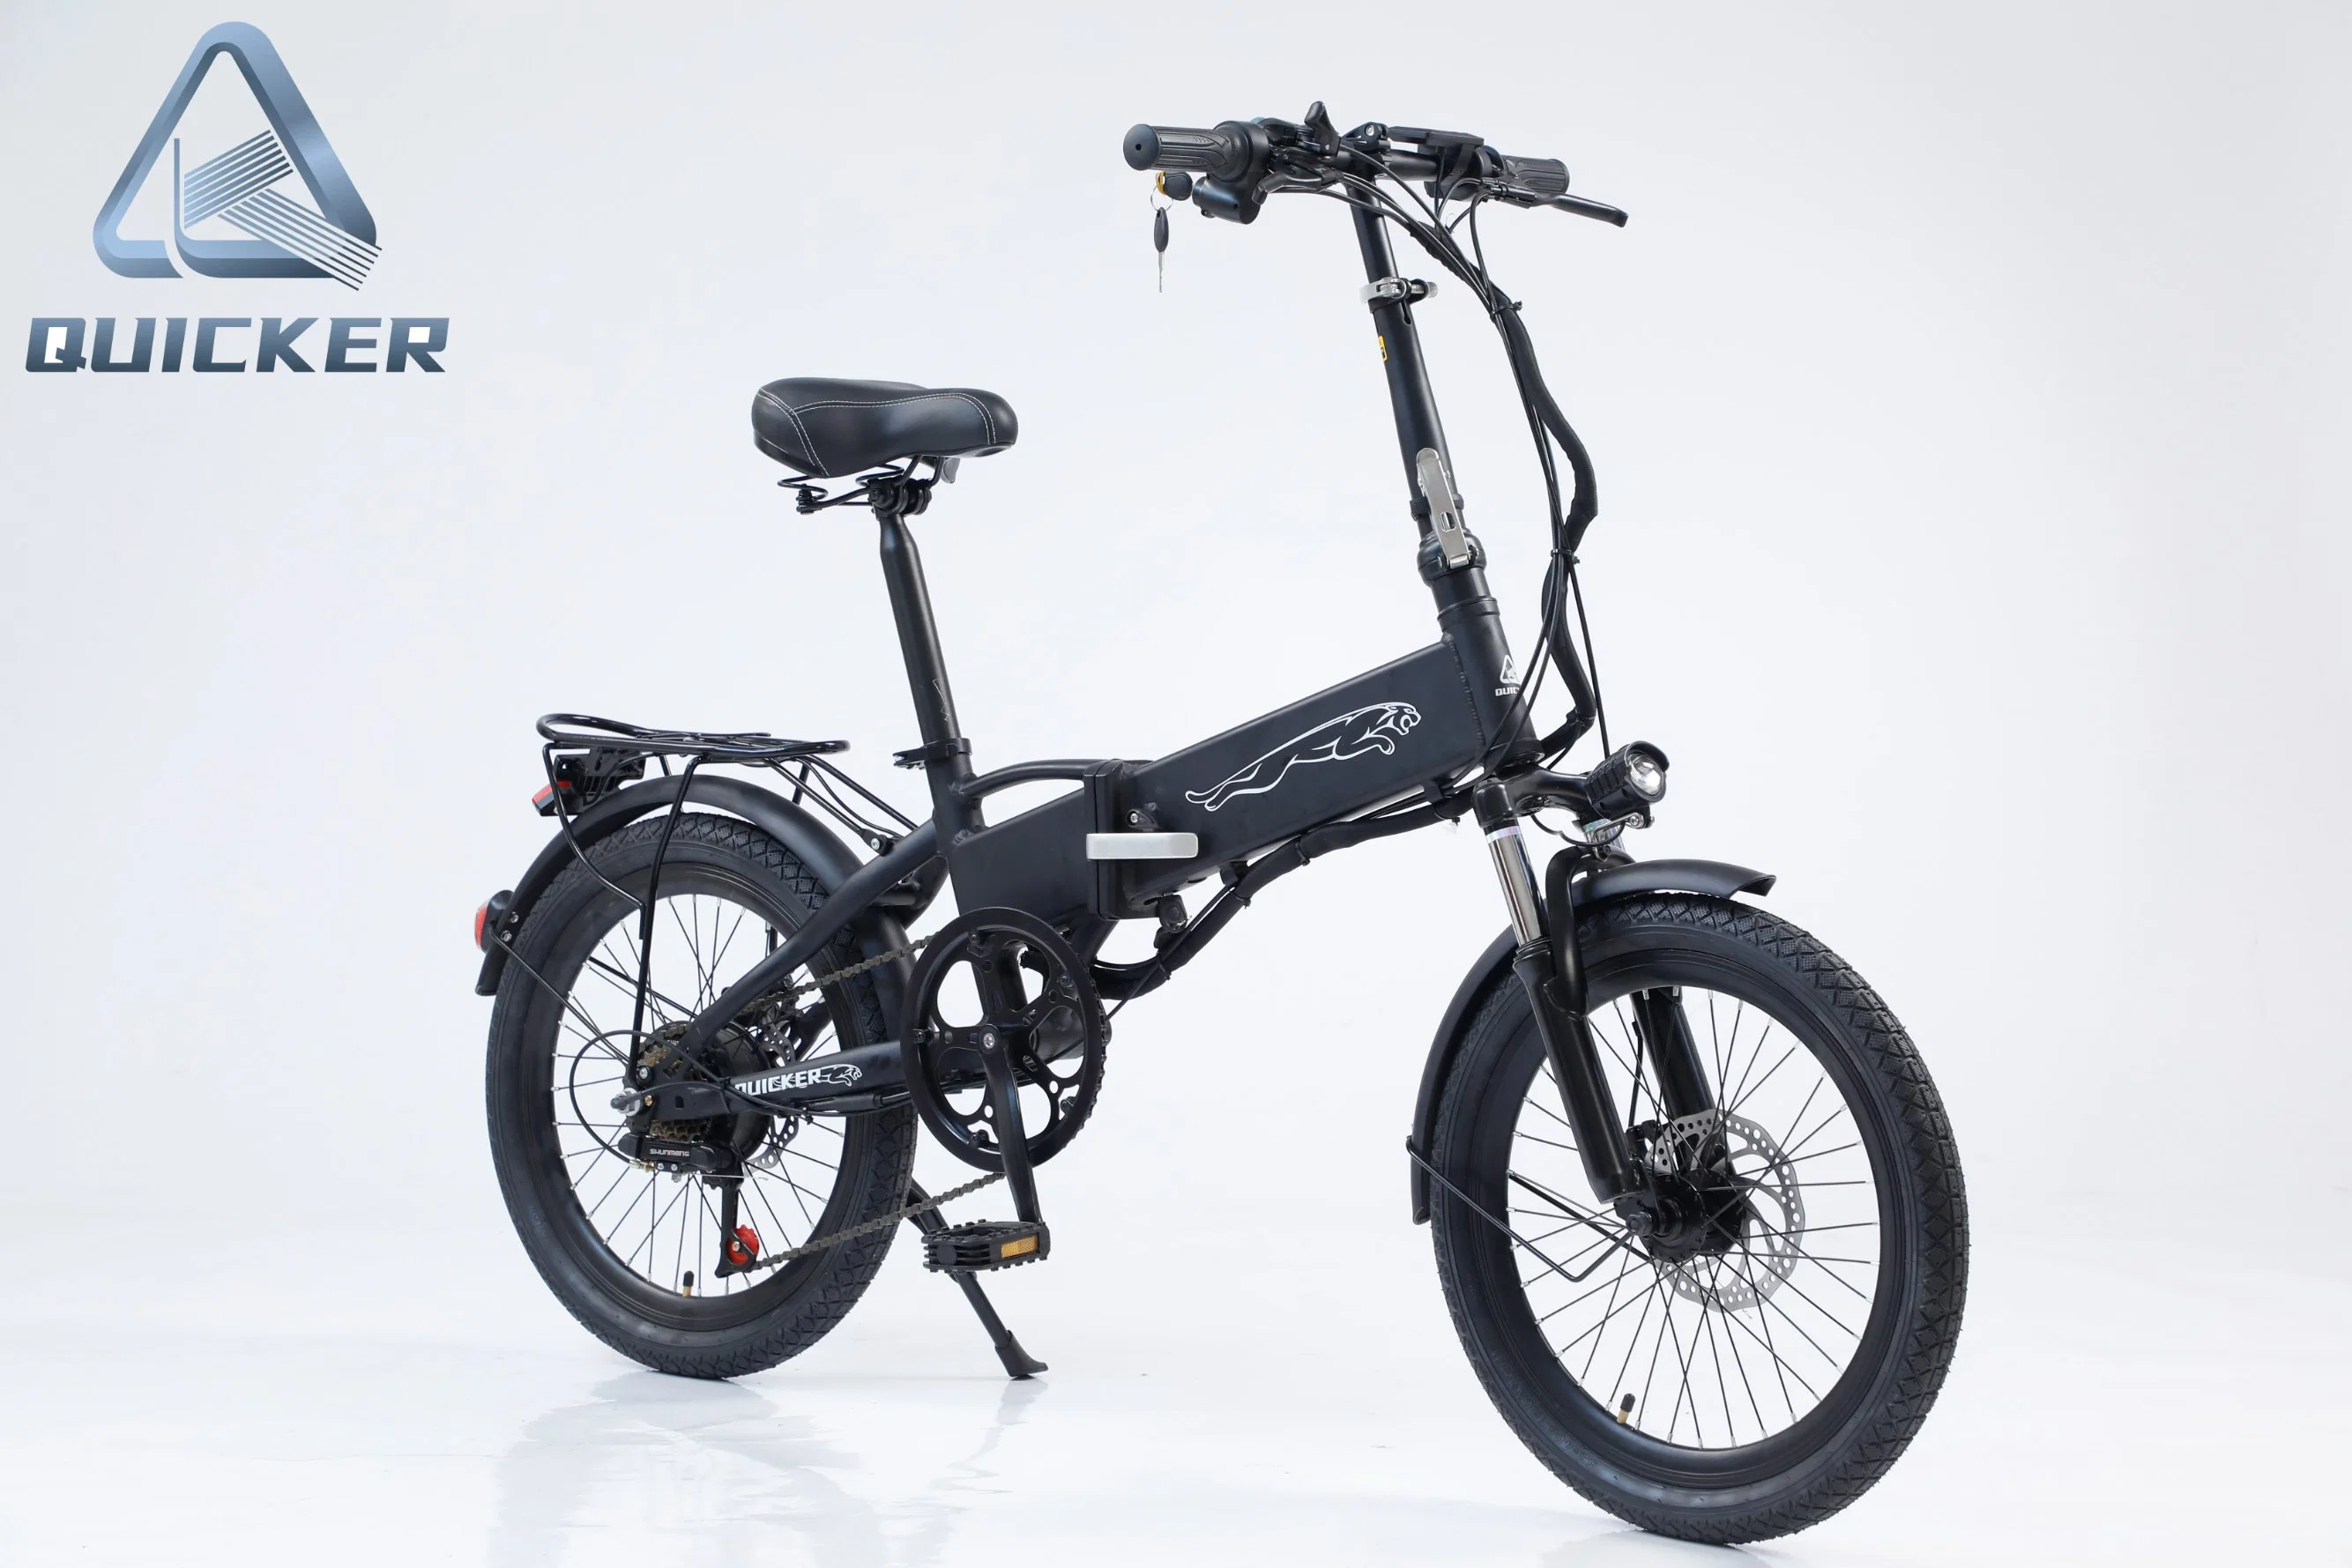 36V 250W Pedal Assist E Power Battery Cycle 48V 350W Man Electric Mountain Bike 750W Adults Ebike Best Electric Bicycle for Sale